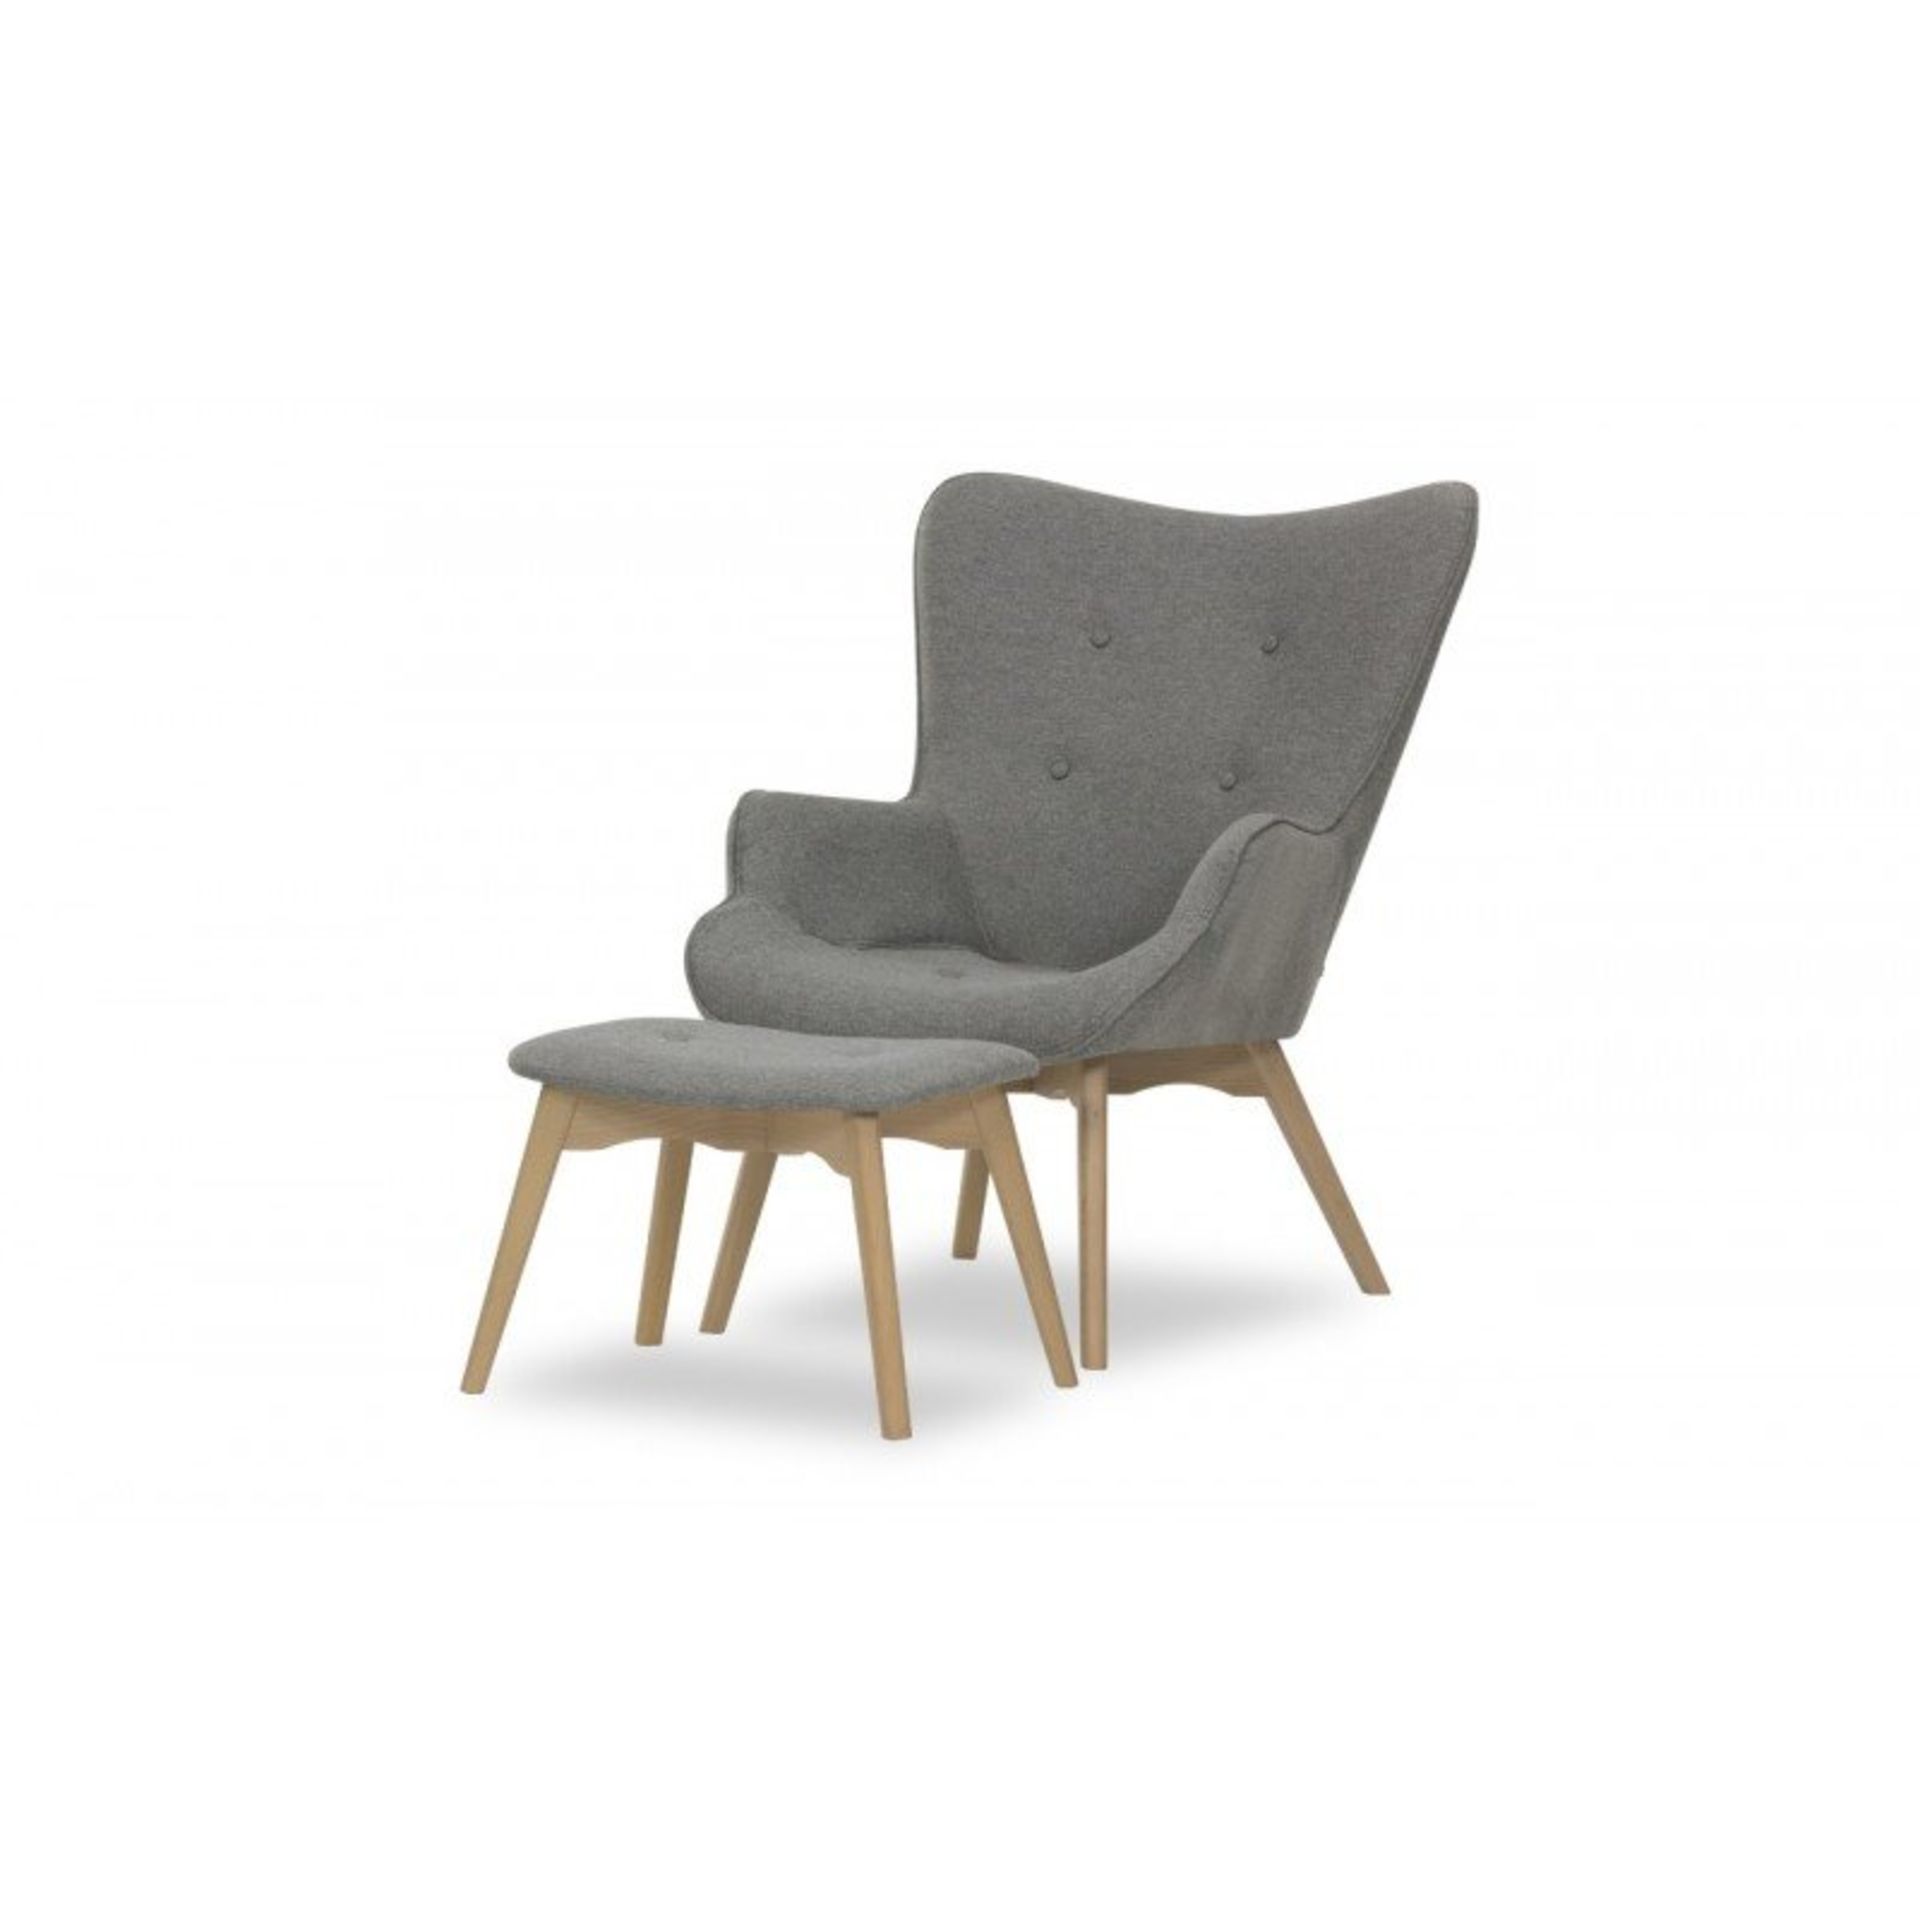 1 GRADE A DUCON CHAIR AND PUFF SET IN GREY / RRP £298.00 (VIEWING HIGHLY RECOMMENDED)